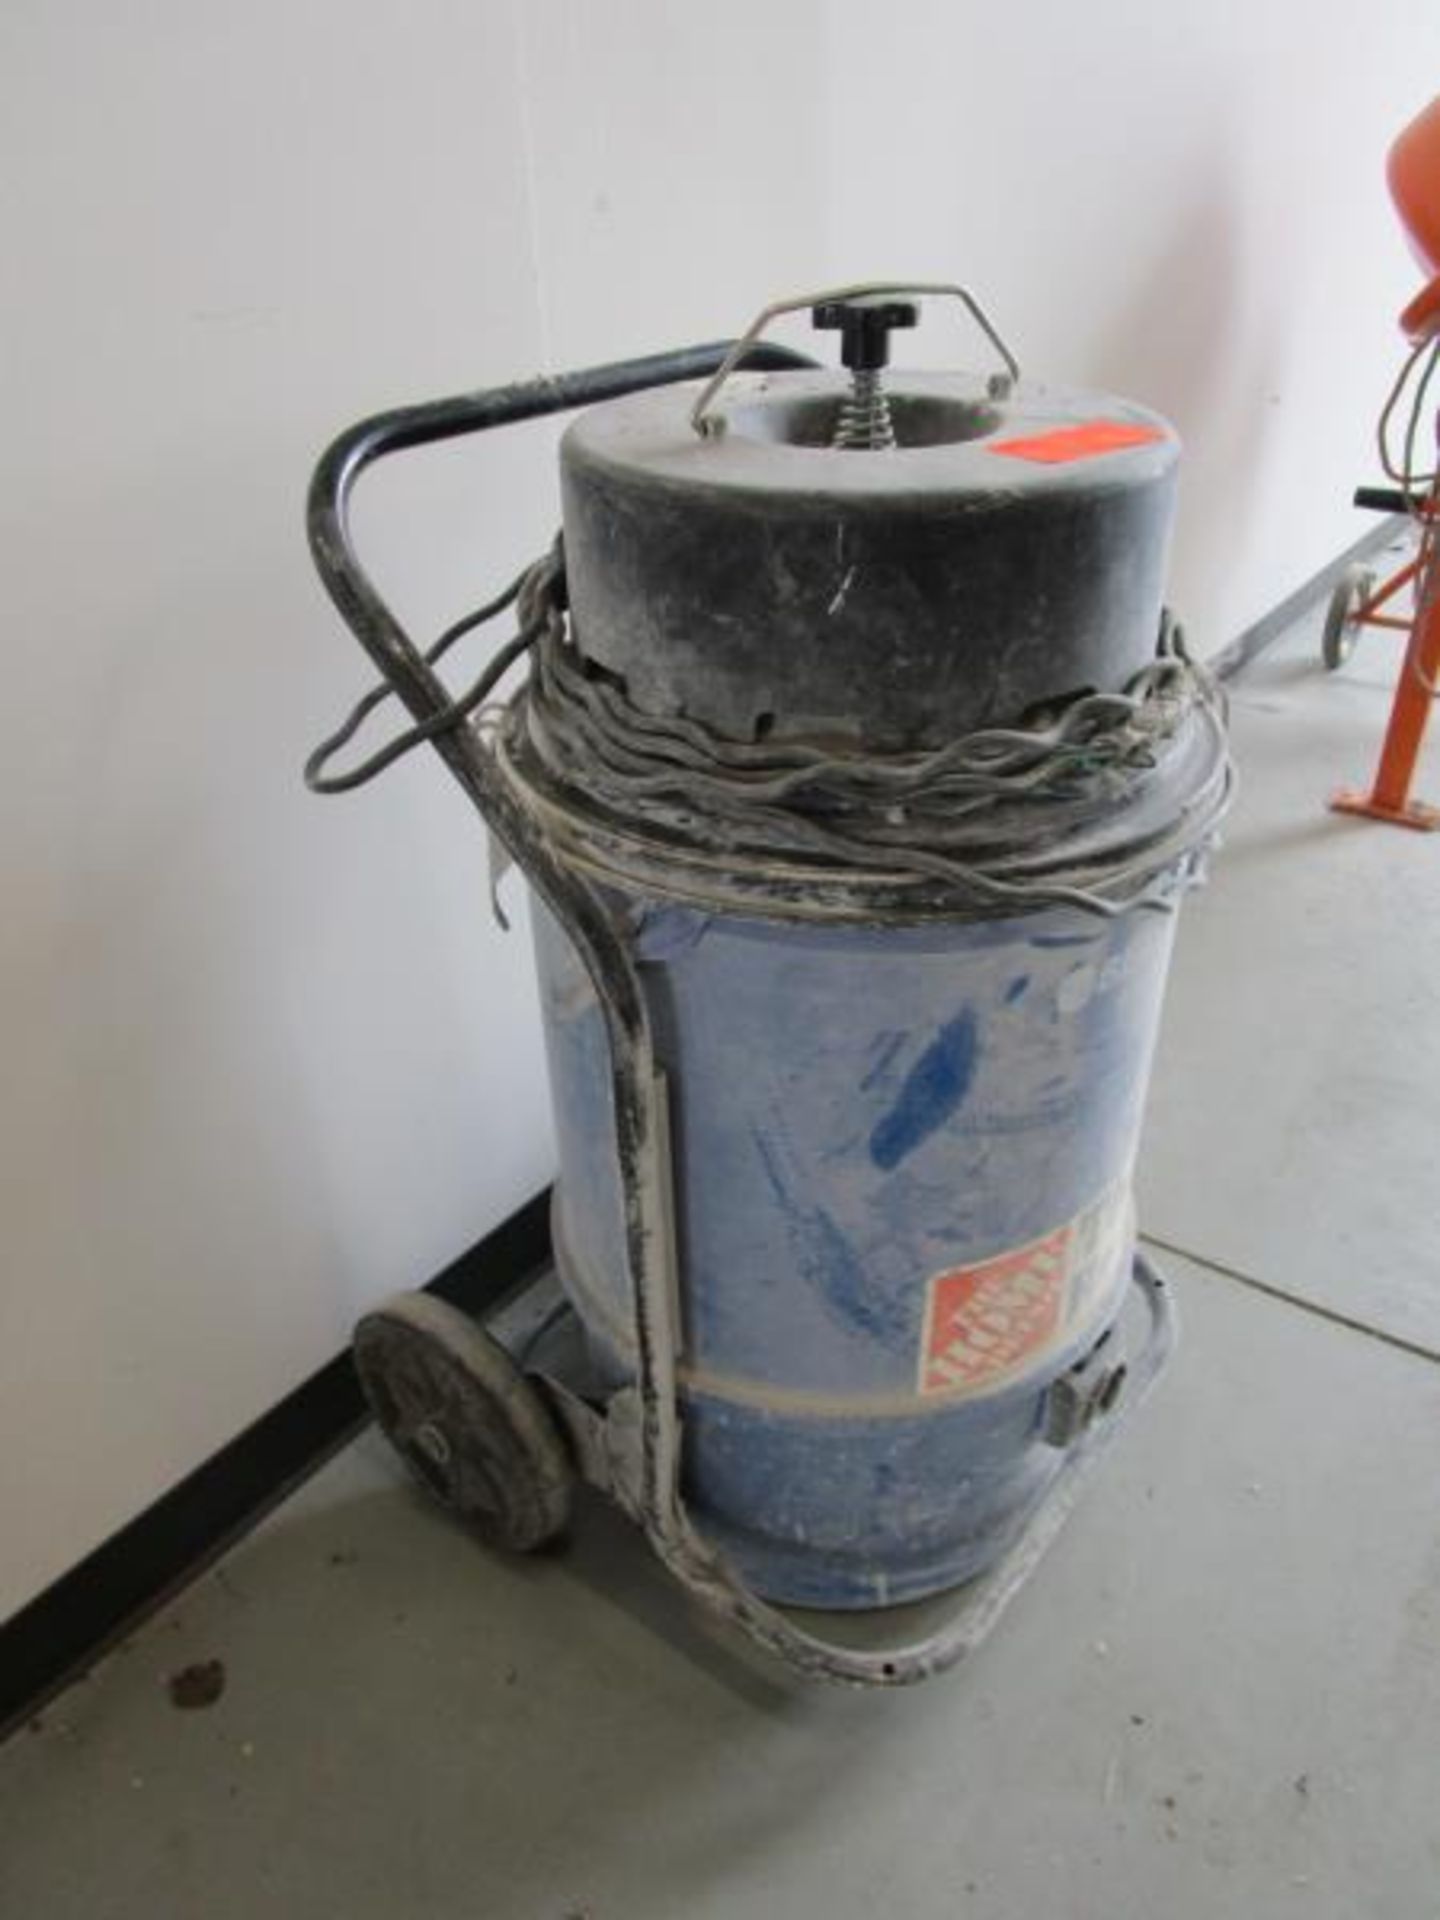 Blastrac 10.5 Gal. Compact Dust Collector, Model: BDC1216 - Image 3 of 4